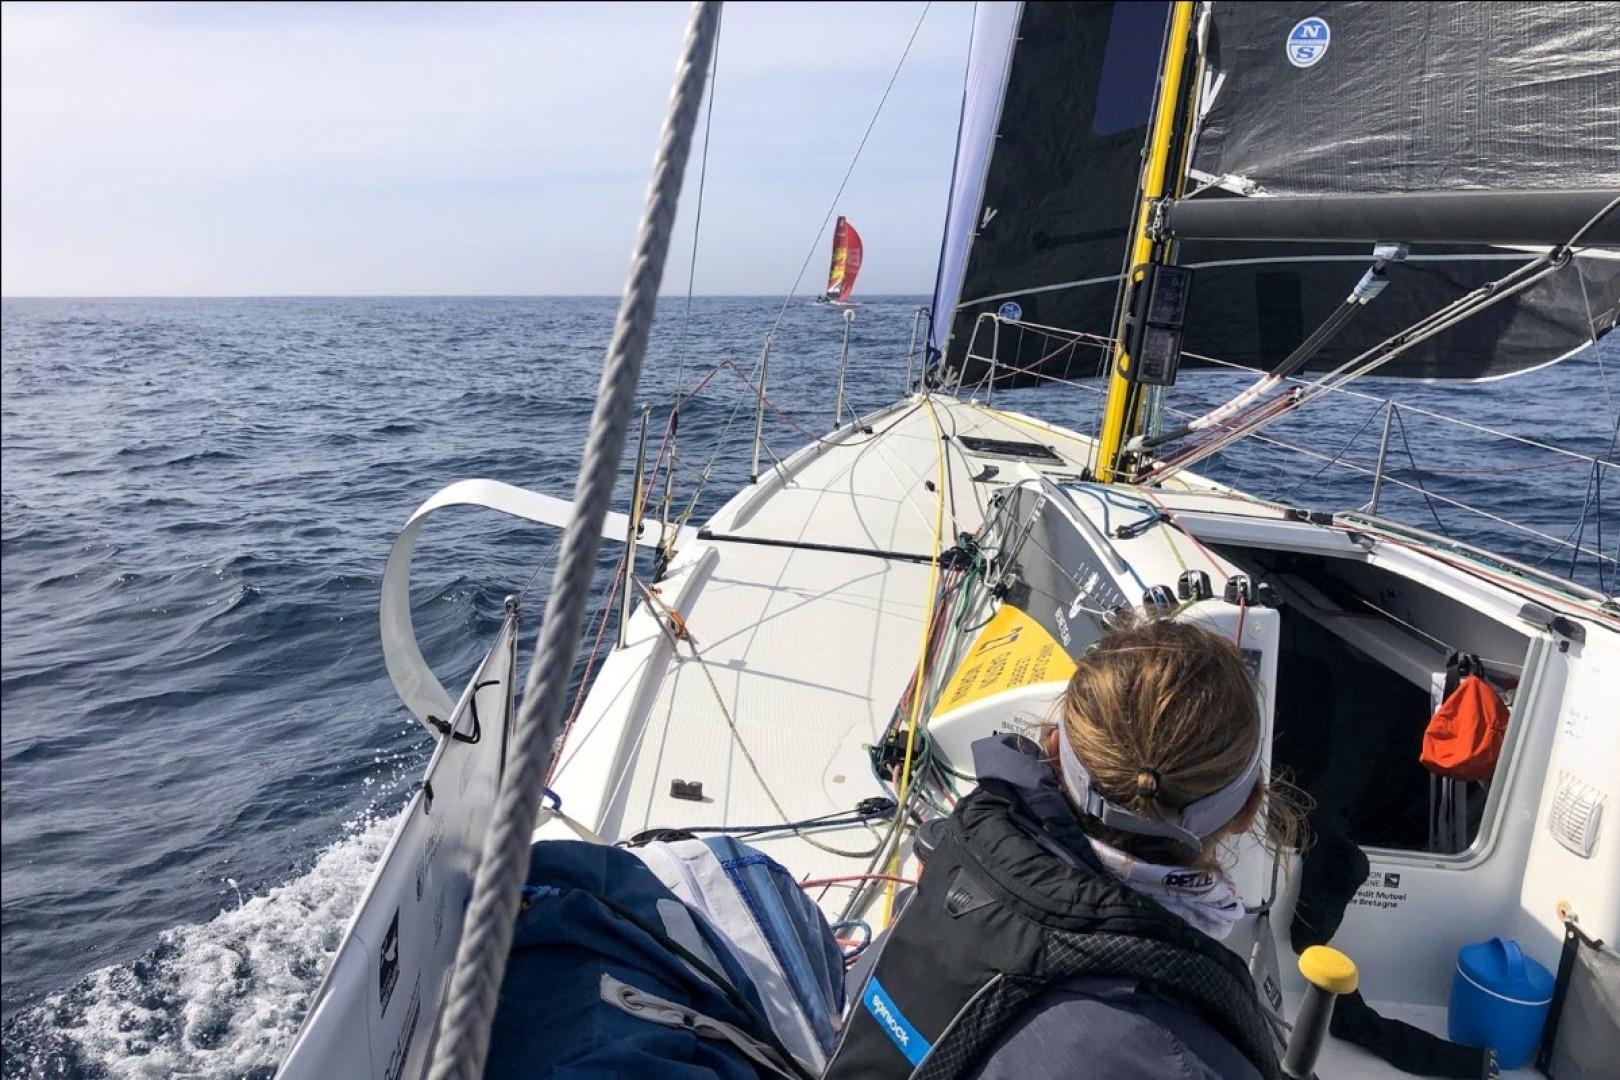 On board Region Bretagne CMB Performance Gaston Morvan and Claire Le Berre in seventh place
Photo © Region Betagne CMB Performance